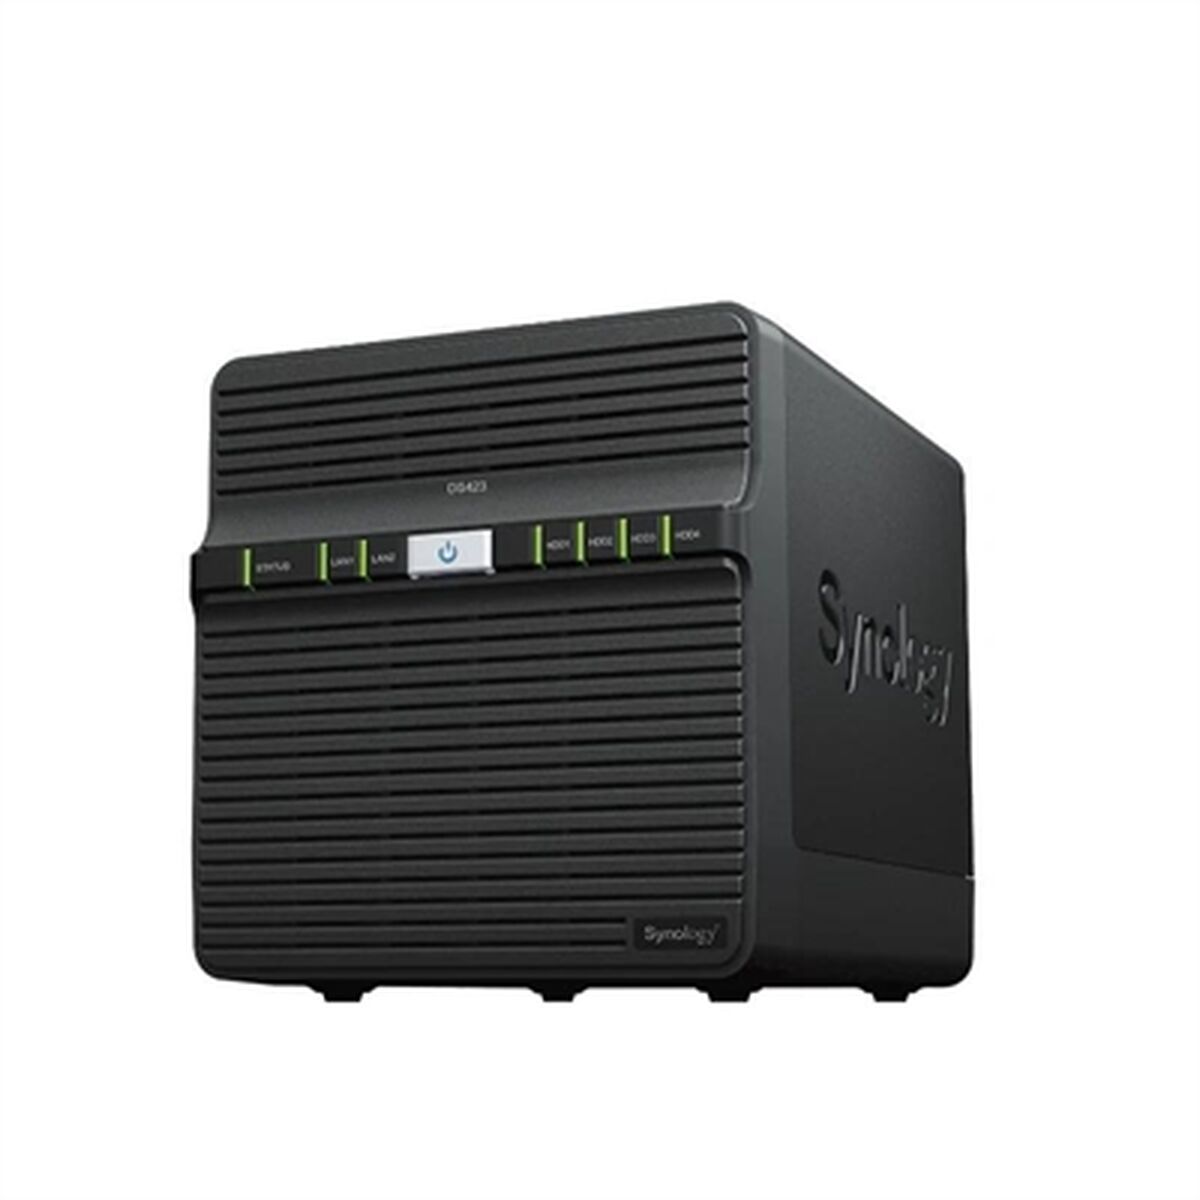 Network Storage Synology DS423 Sort